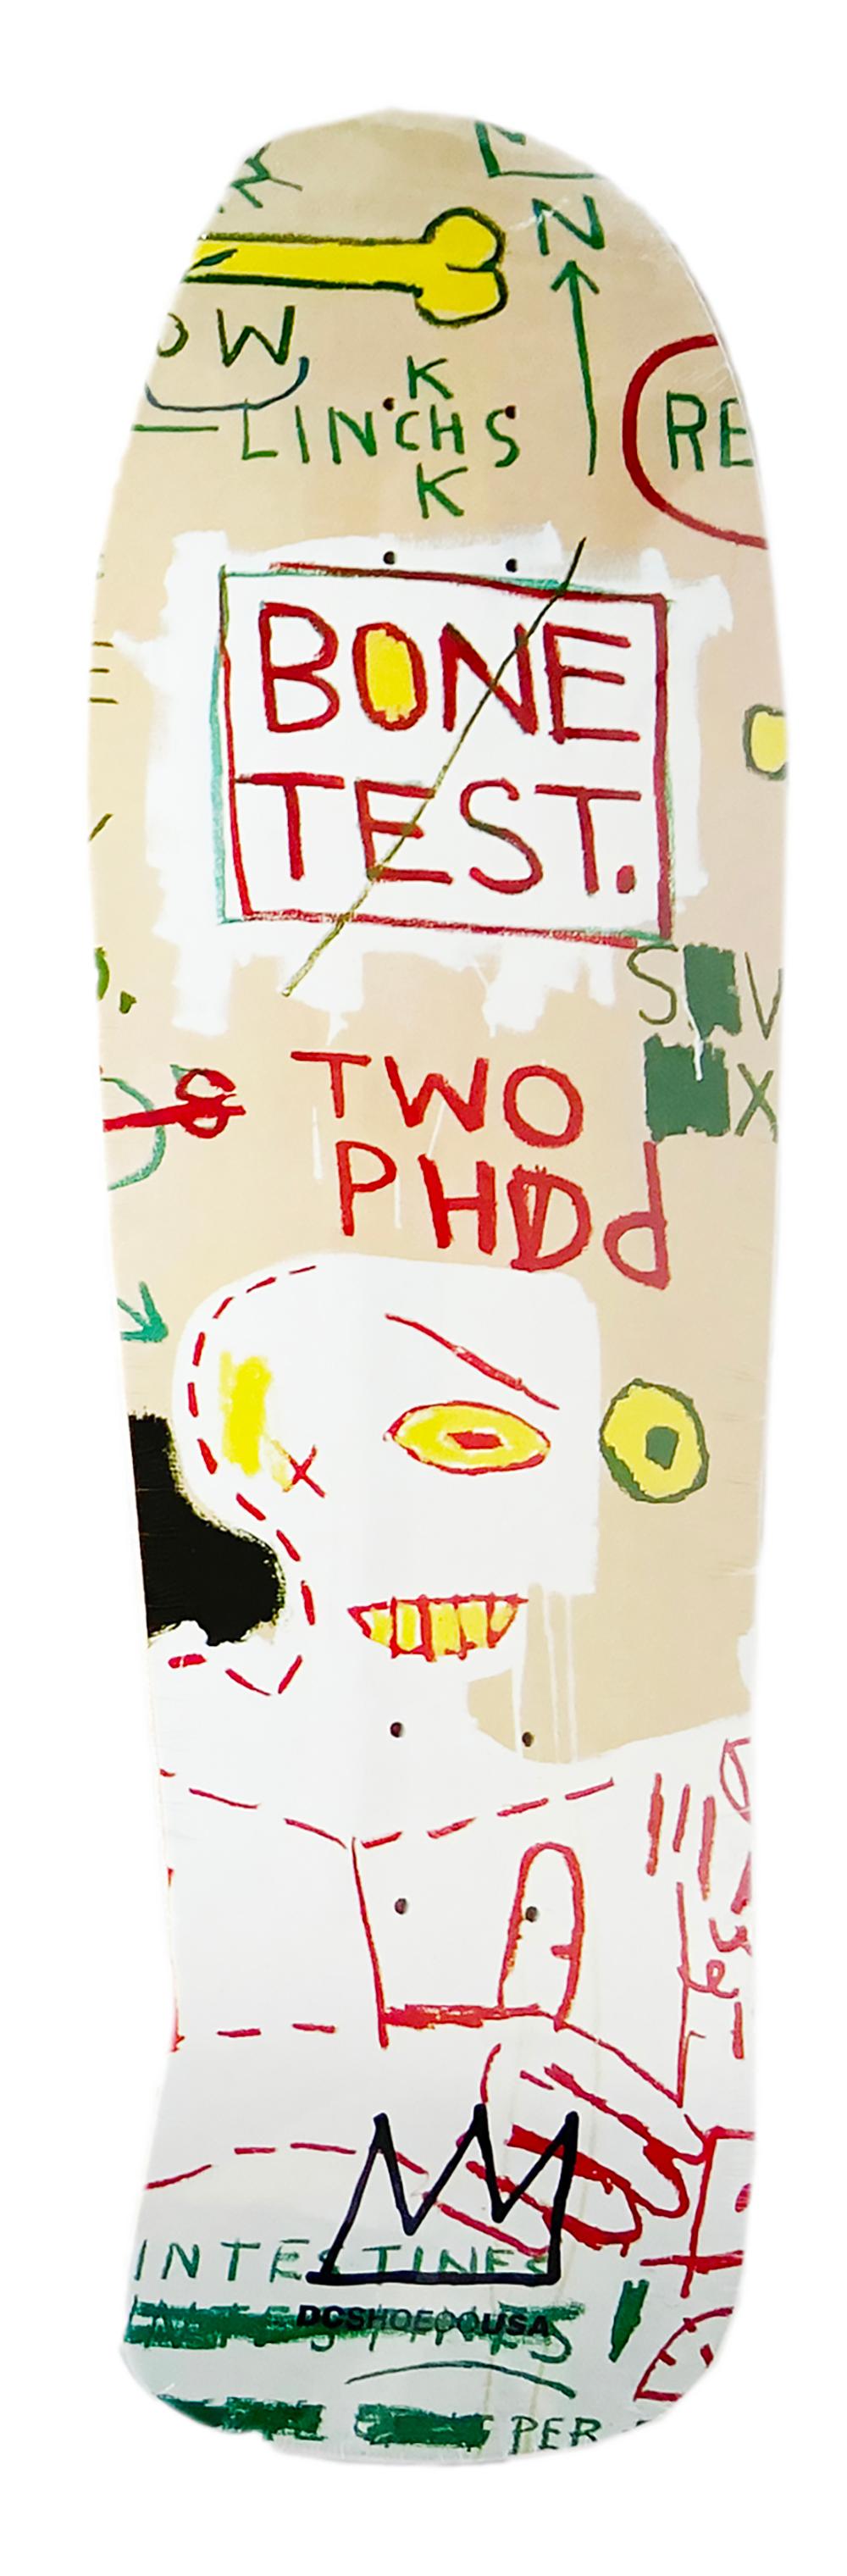 Jean-Michel Basquiat Skateboard Decks:
A set of 2 limited edition Jean-Michel Basquiat Skateboard Decks licensed by the Estate of Jean-Michel Basquiat in conjunction with Artestar in 2021, featuring offset imagery of three individual early 1980s